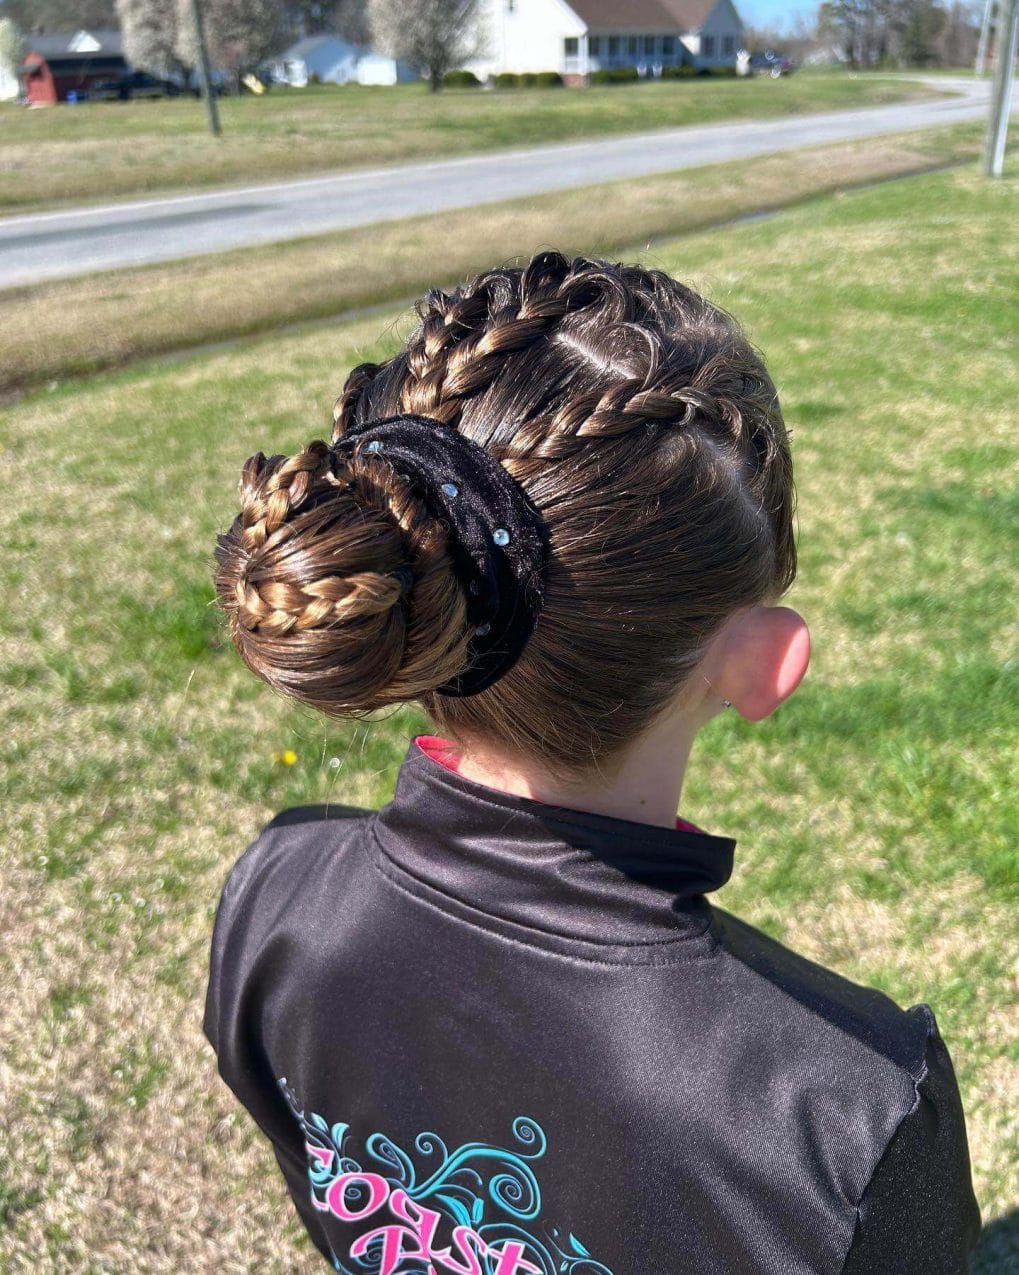 Functional gymnastics bun wrapped in a braid and adorned with a sparkling black band for a decorative touch